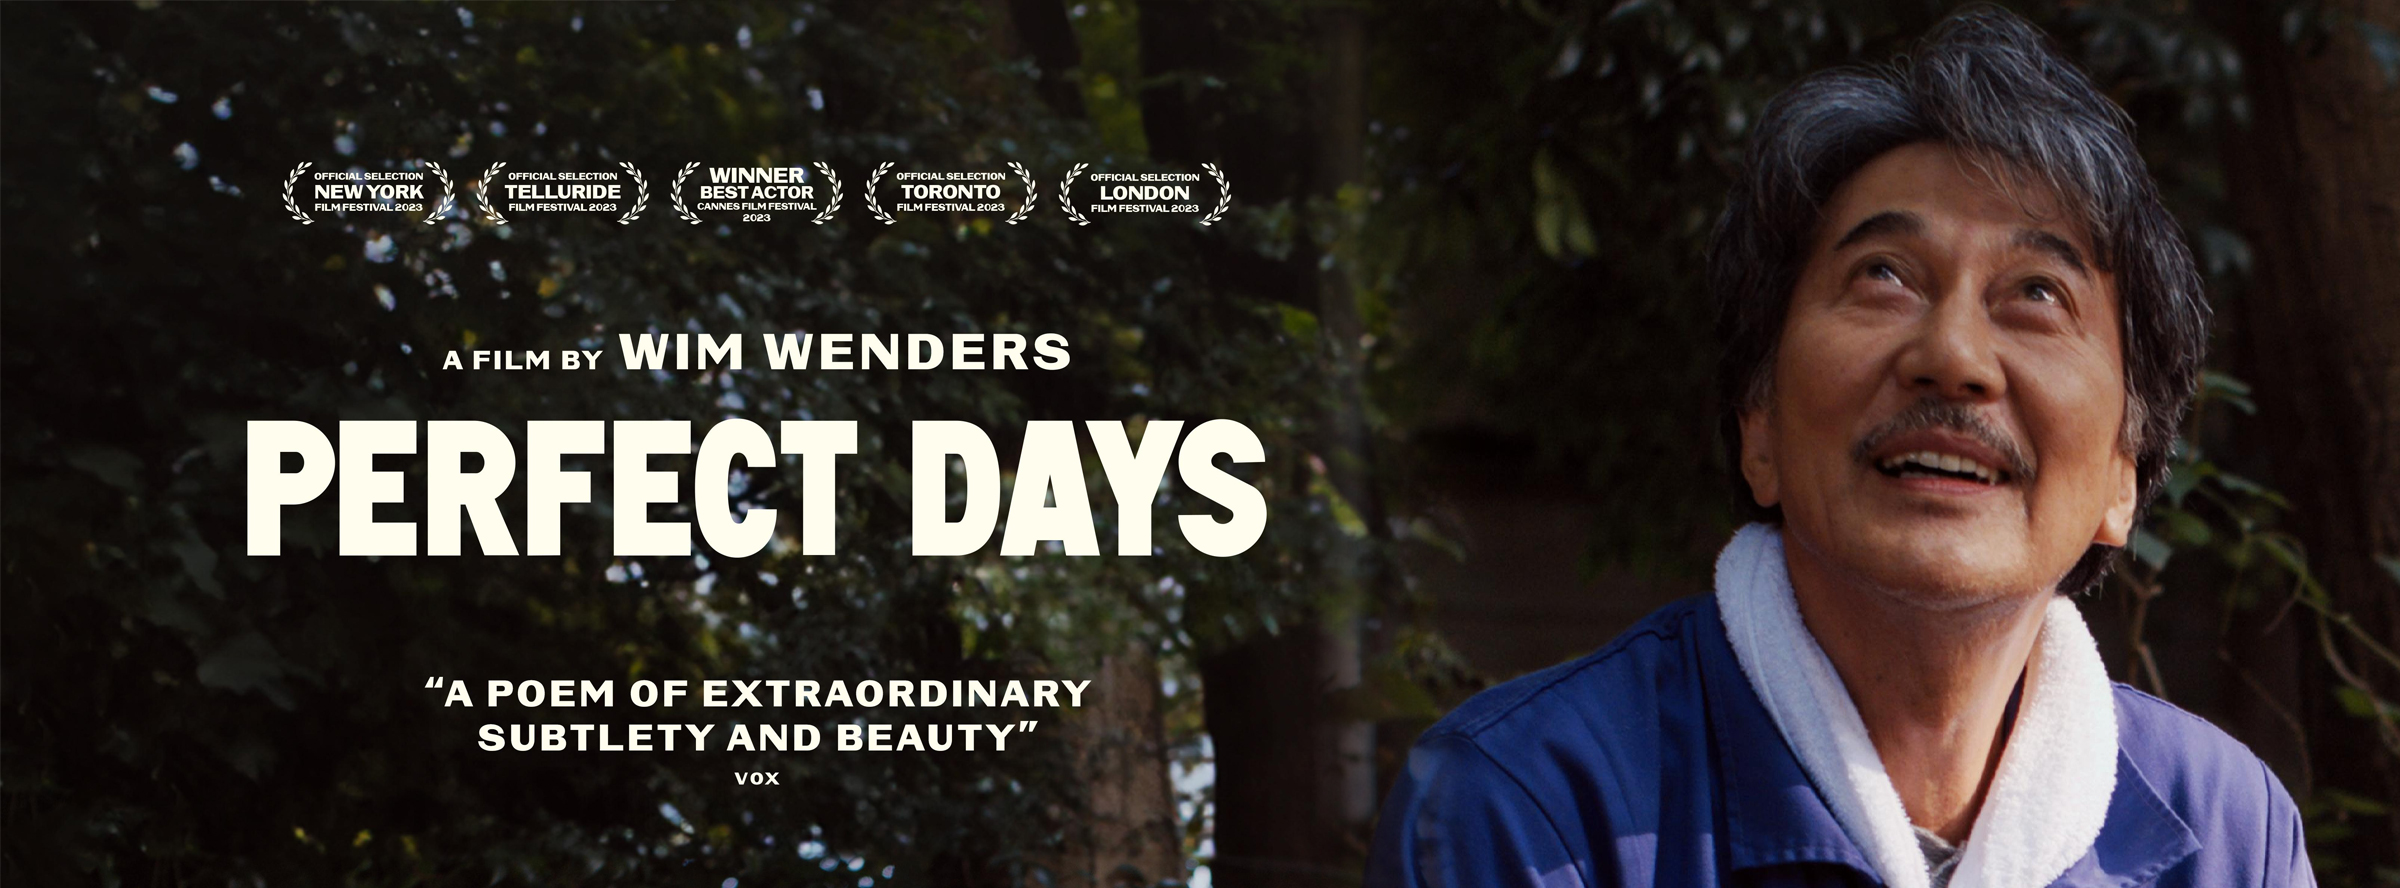 Slider Image for Perfect Days